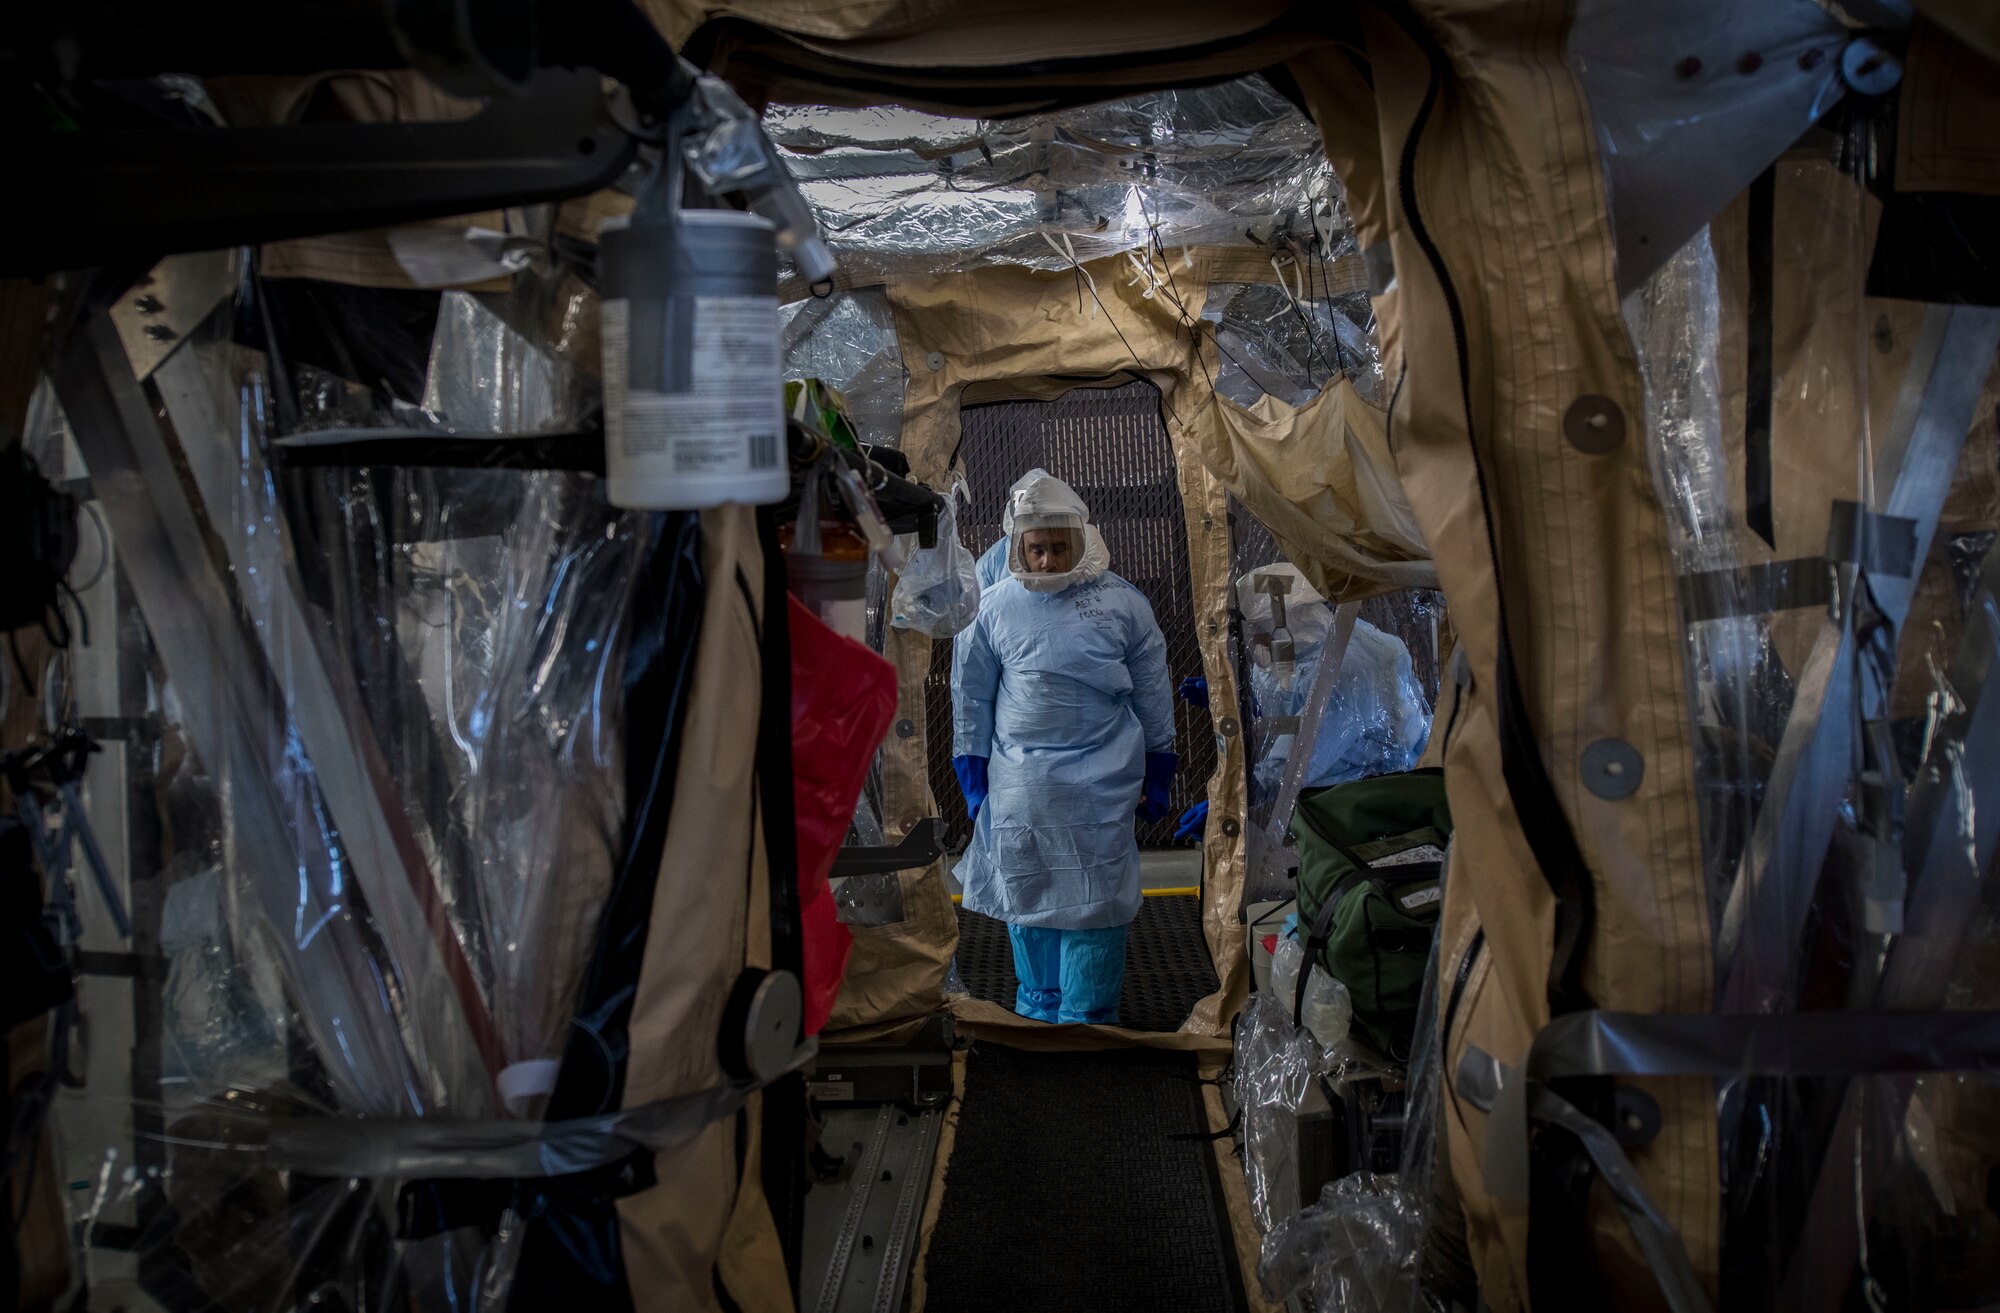 Staff Sgt. Clinton Campbell, an aeromedical evacuation technician assigned to the 375th Aeromedical Evacuation Squadron from Scott Air Force Base, Ill., carries a simulated Ebola patient on a litter into the Transport Isolation System during a Transport Isolation System training exercise at Joint Base Charleston, S.C., October 23, 2019. The TIS is a device used to transport Ebola patients, either by C-17 Globemaster III or C-130 Hercules, while preventing the spread of disease to medical personnel and aircrews until the patient can get to one of three designated hospitals in the United States that can treat Ebola patients. JB Charleston is currently the only military installation with a TIS. The TIS mission is a sub-specialty of the aeromedical evacuation mission which requires frequent training to maintain readiness.